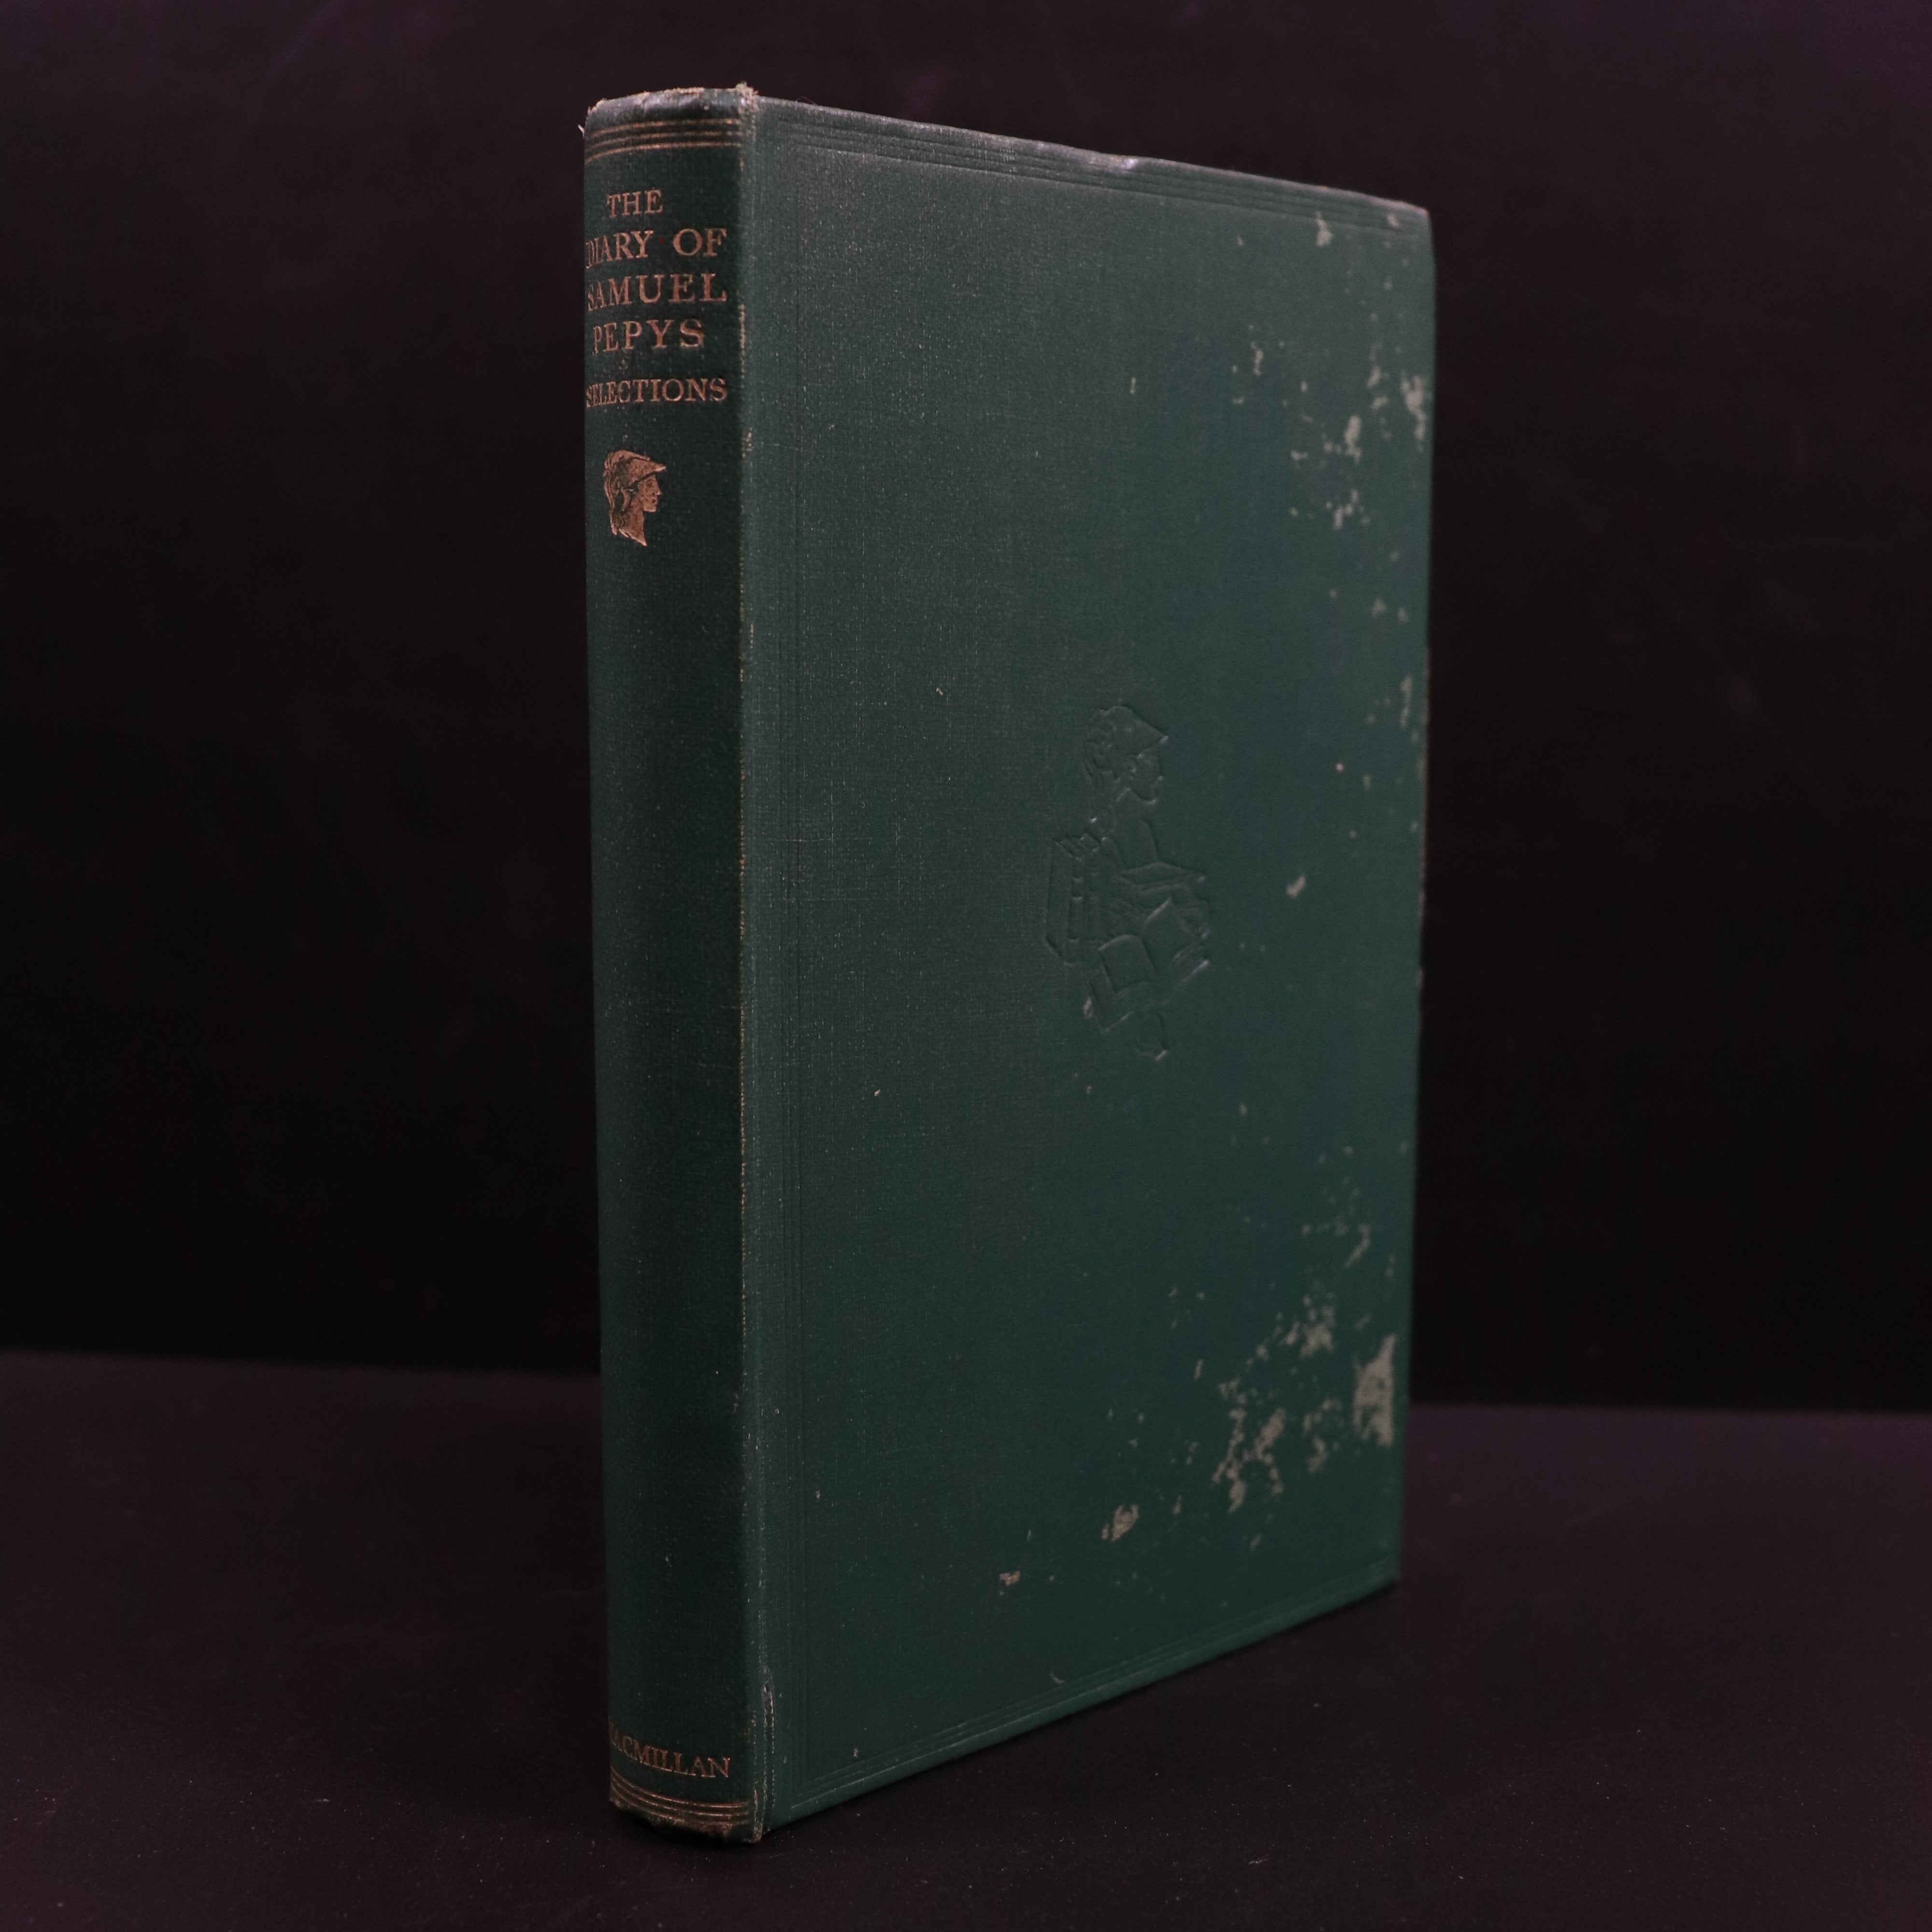 1933 The Diary Of Samuel Pepys Selections British History Book